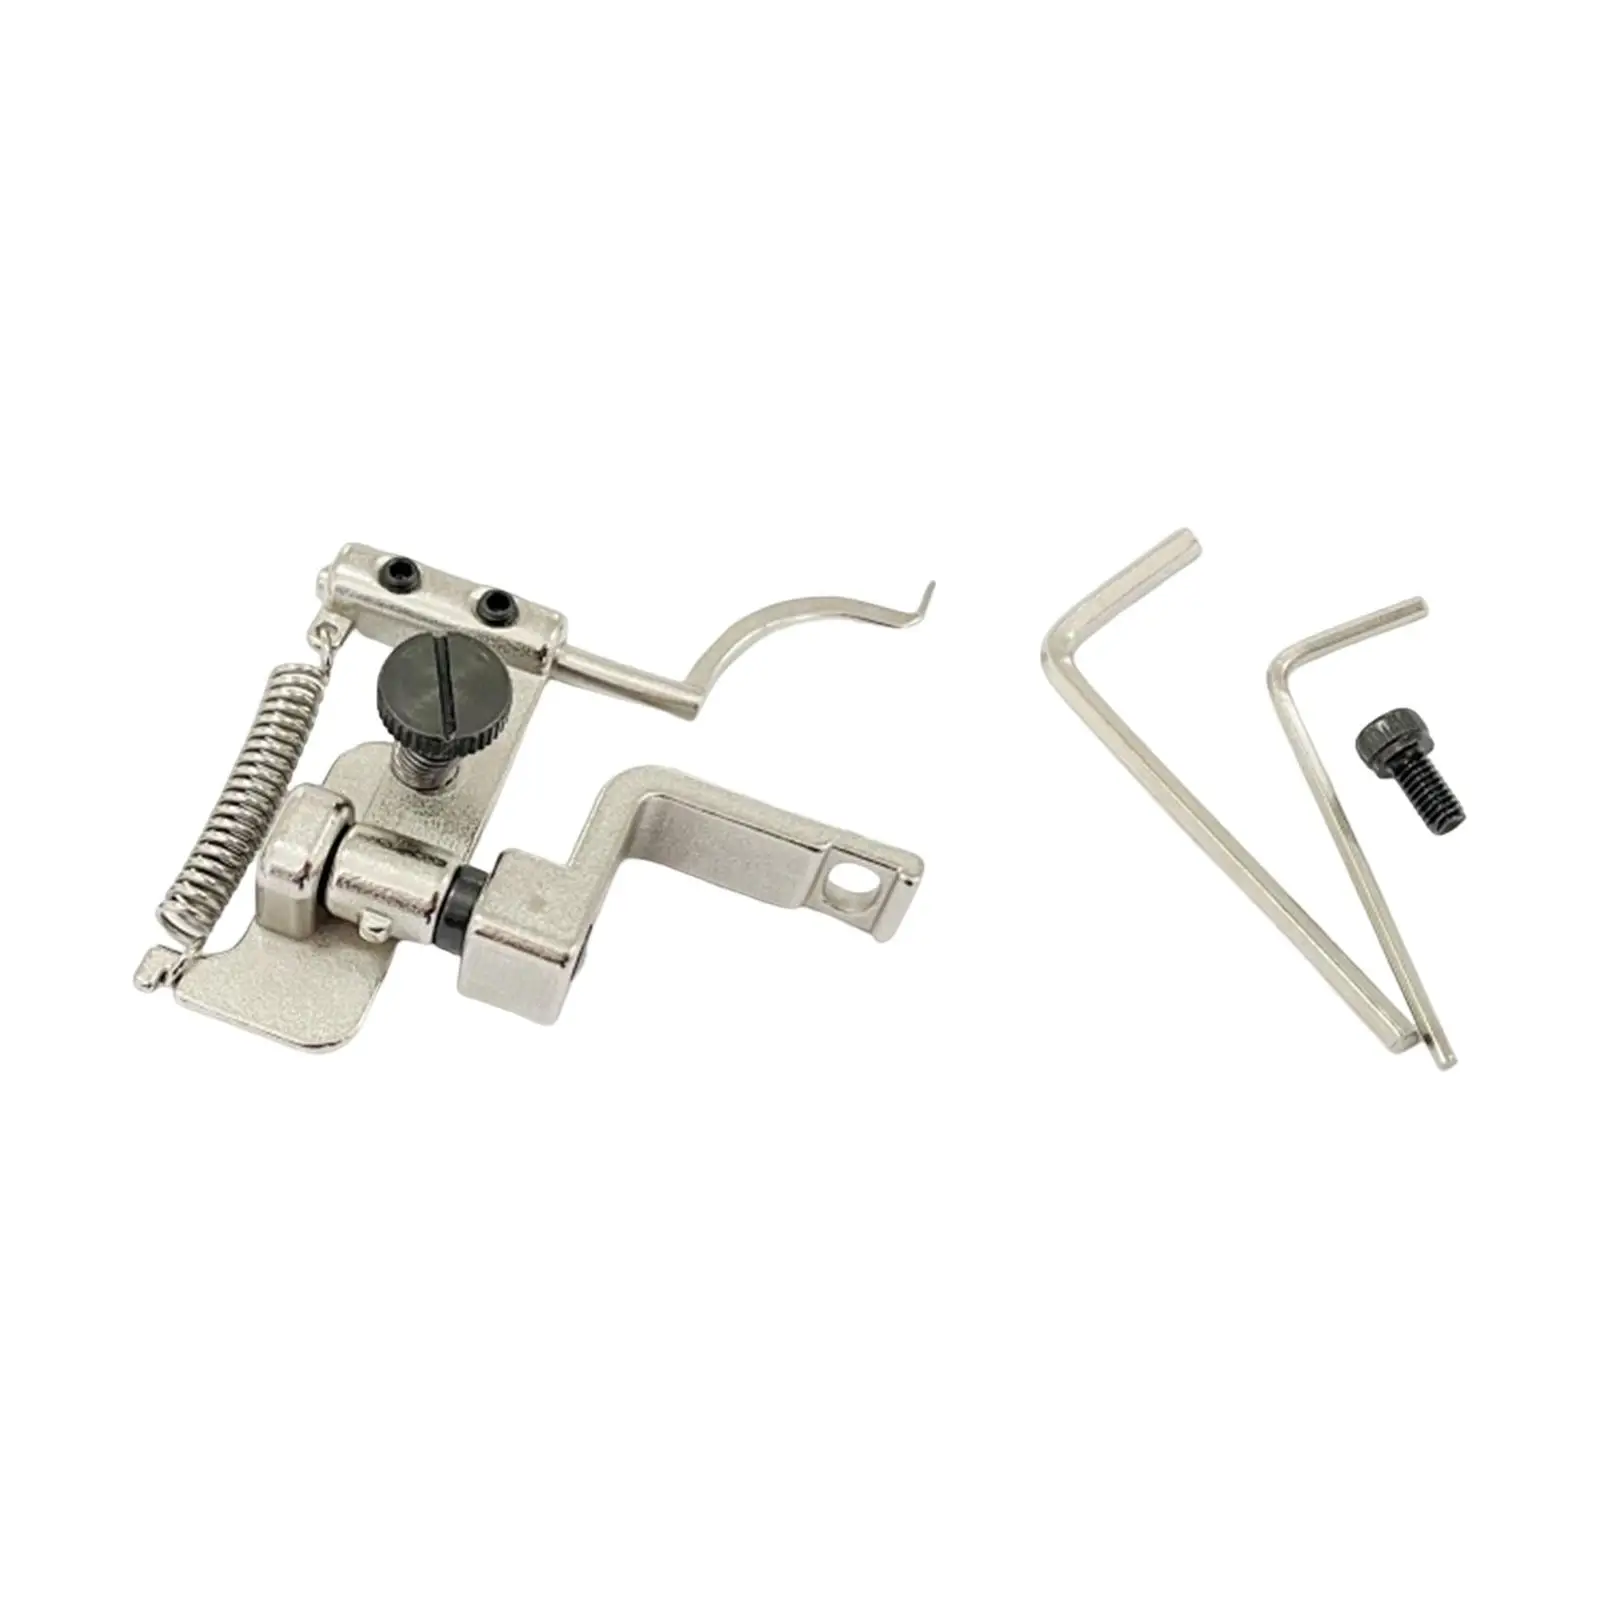 Suspended Edge Guide Seams Stitch Sewing Machine Accessories Guide Set Adjustable for Sewing Quilting Industrial Sewing Machines